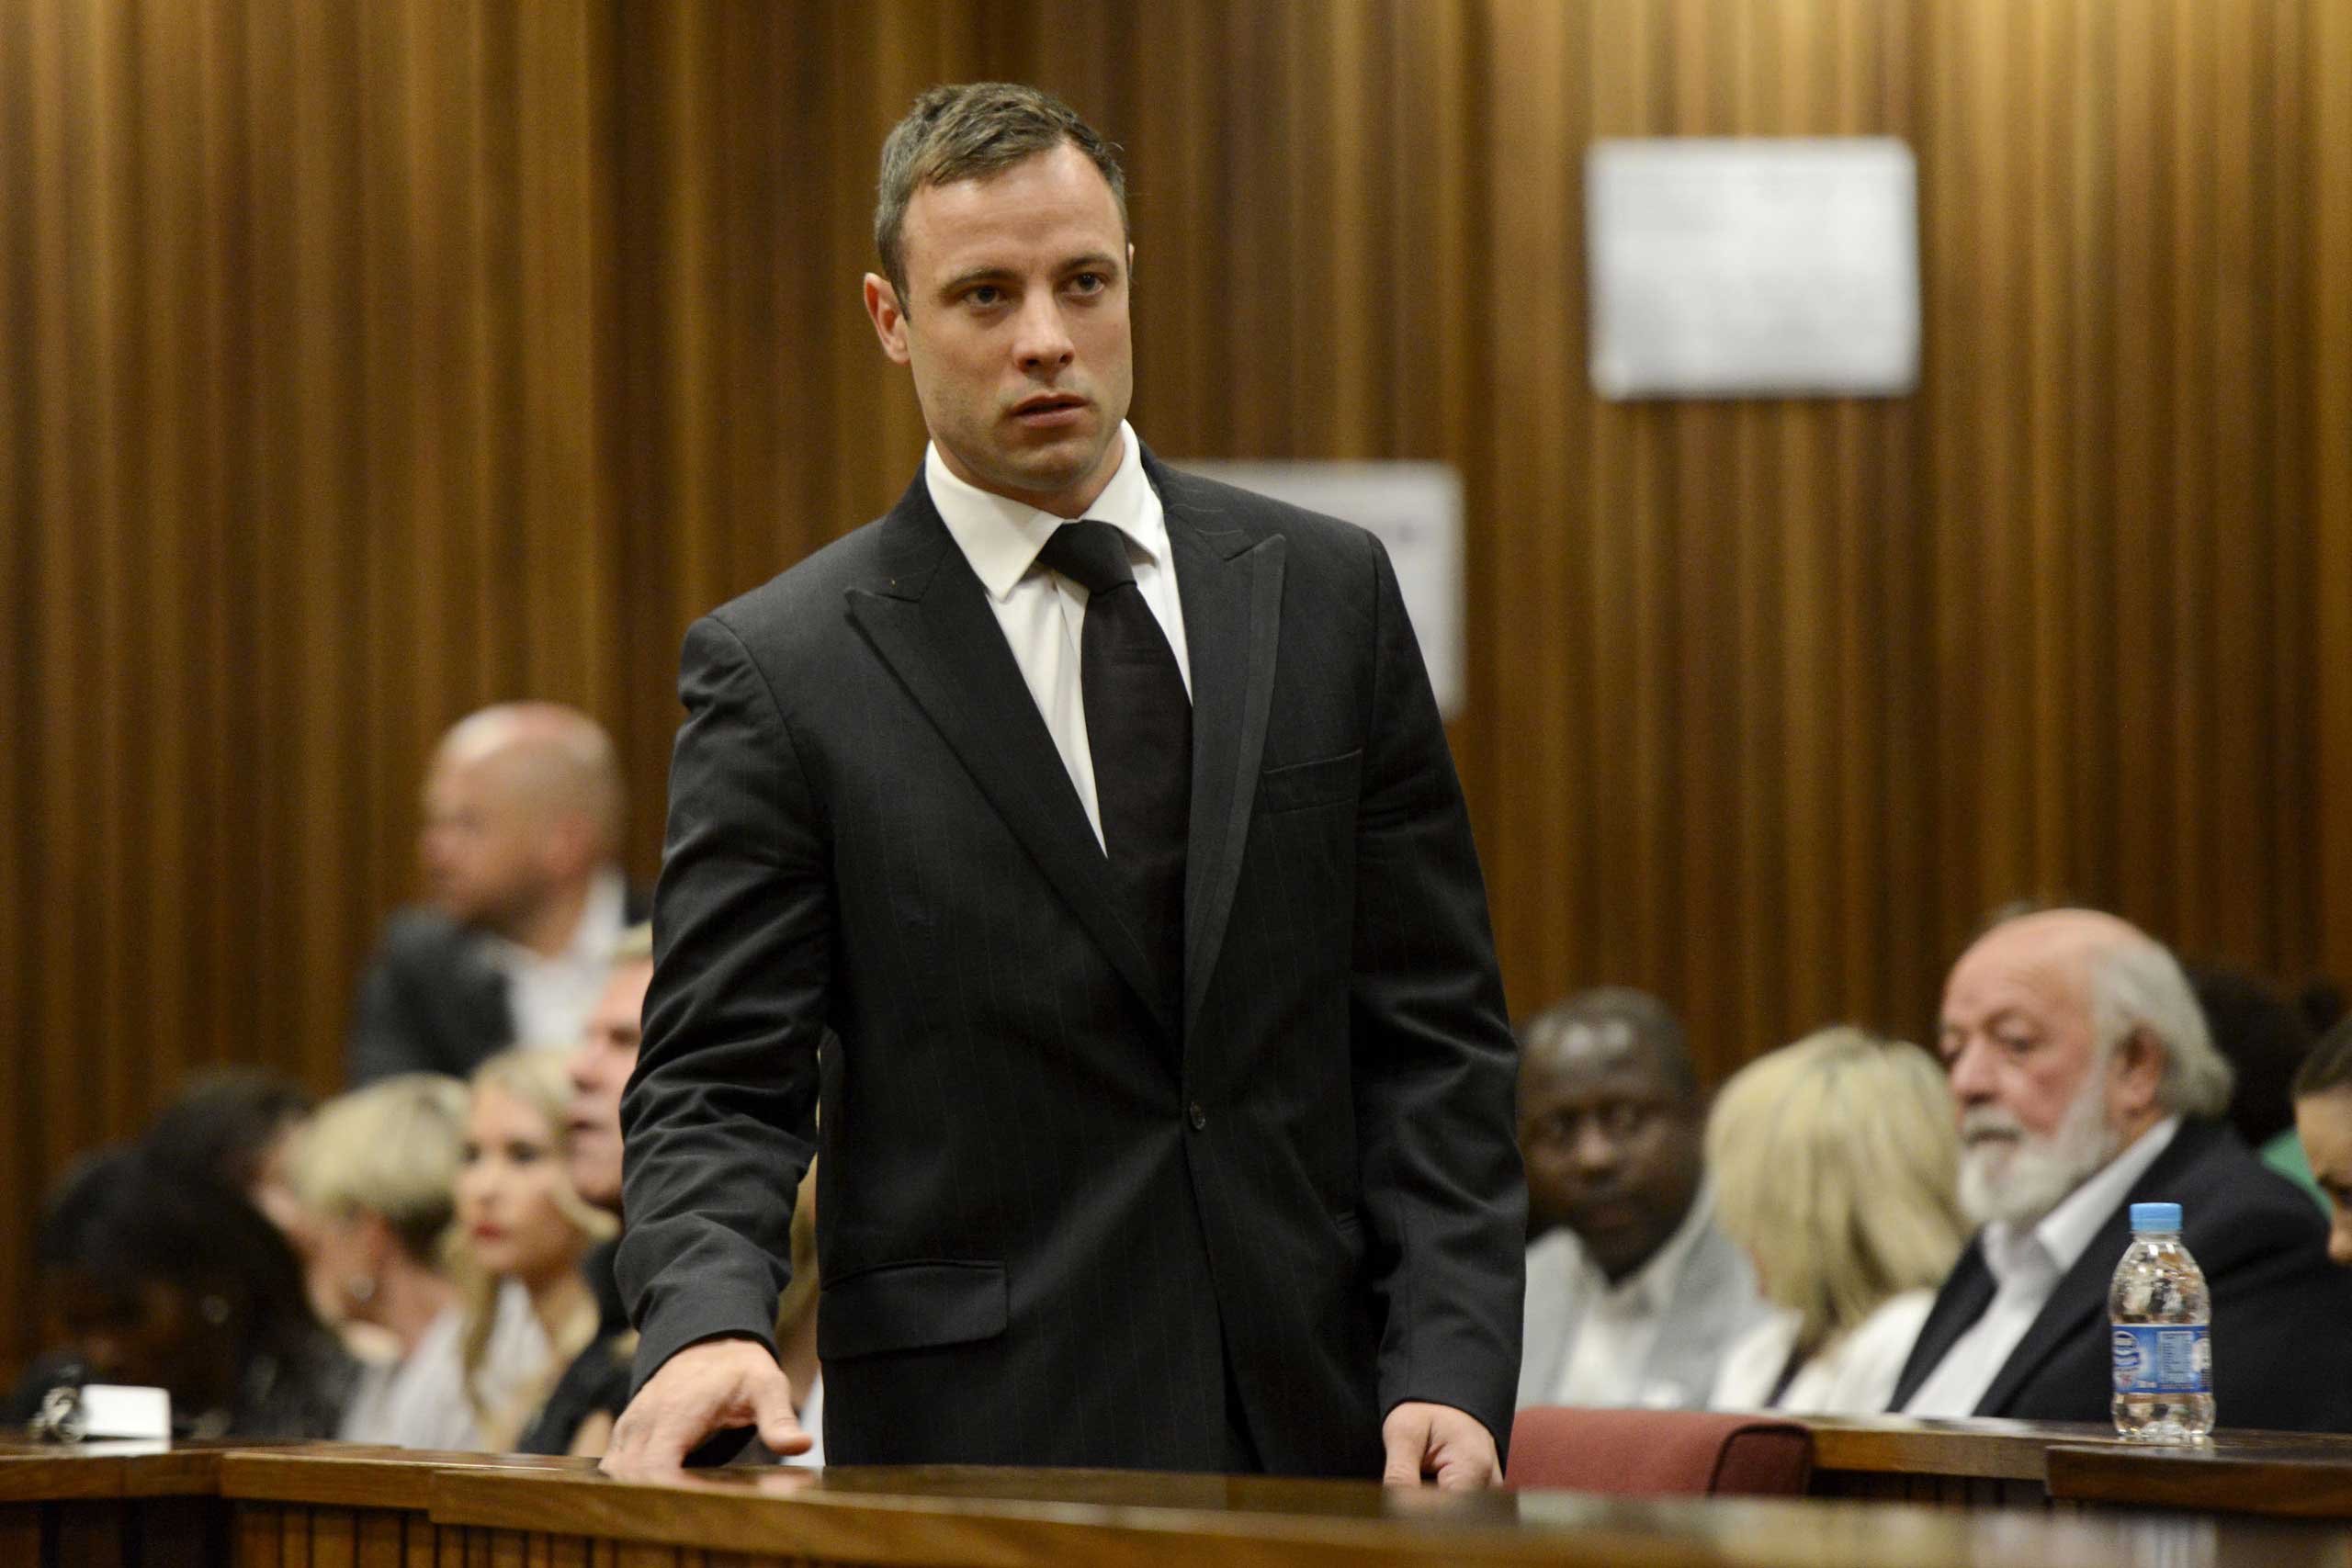 Oscar Pistorius arrives in the Pretoria High Court for sentencing in his murder trial on Oct. 21, 2014, in Pretoria, South Africa (Herman Verwey—Pool/Getty Images)